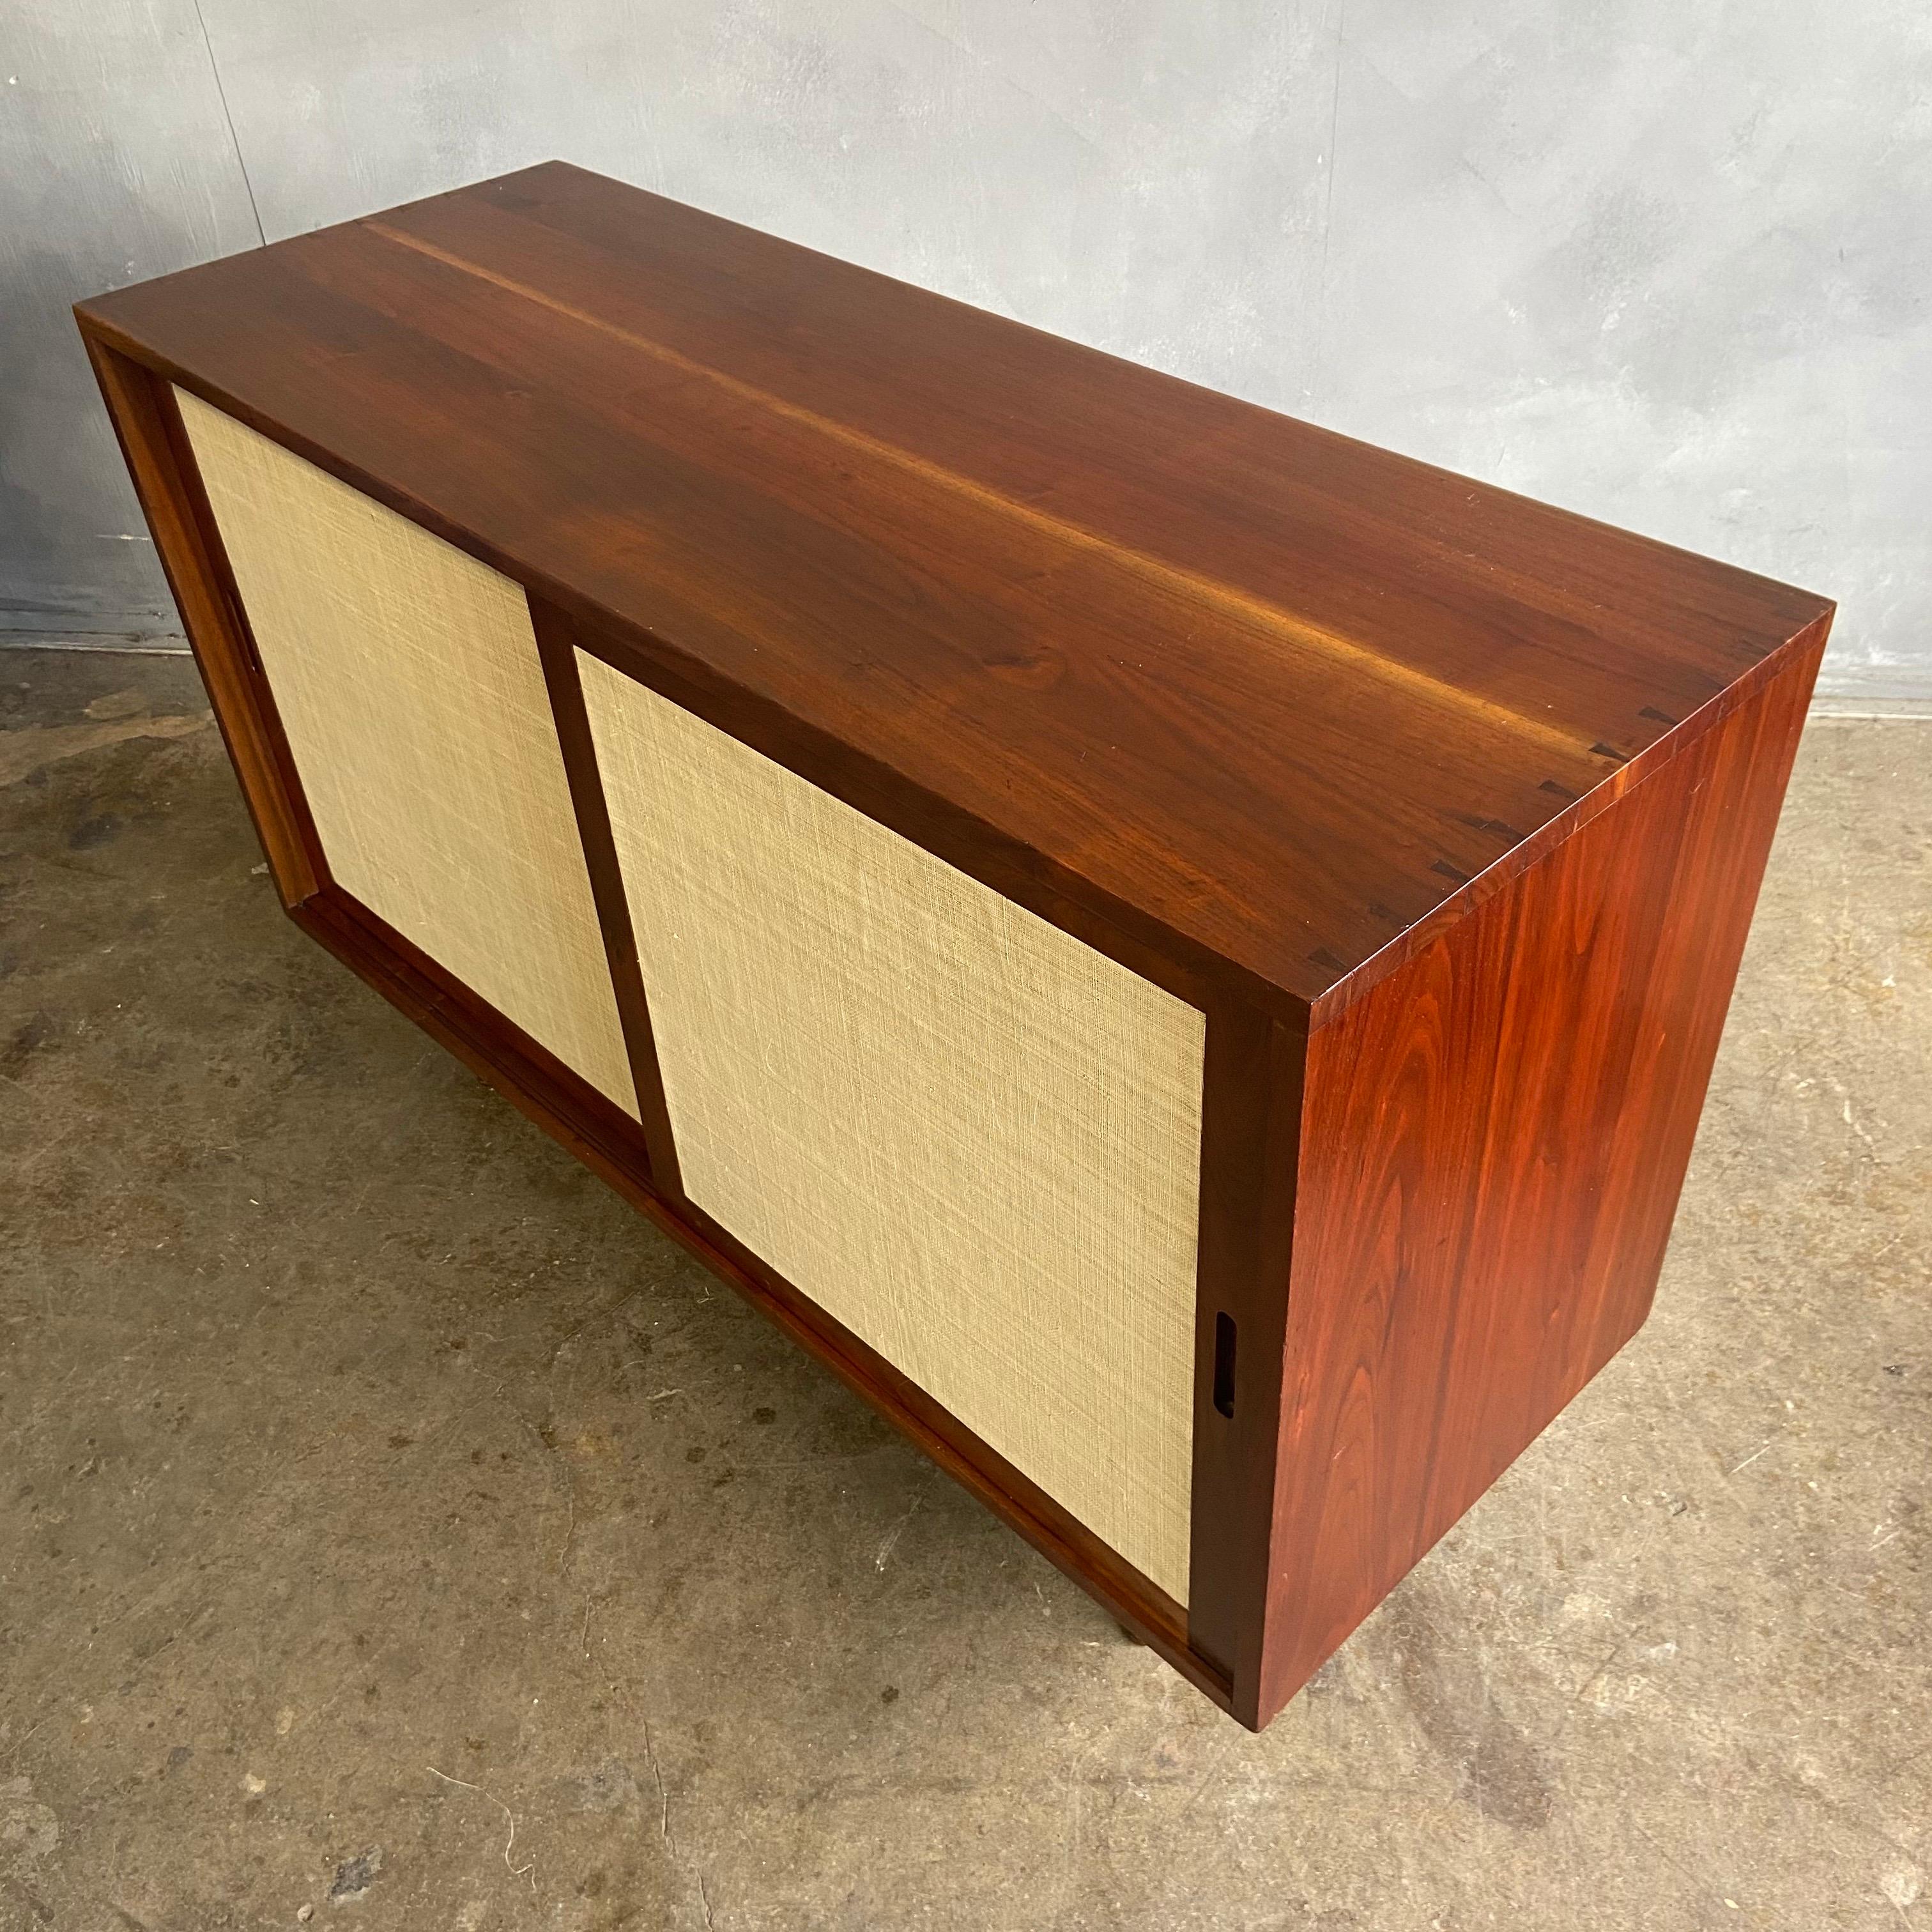 For your consideration is this lovely Phillip Lloyd Powell sliding door cabinet with perfect proportions. Featuring black walnut with his signature dove-tail joinery and leg dowel connections. inside cabinet has two adjustable shelves on the right